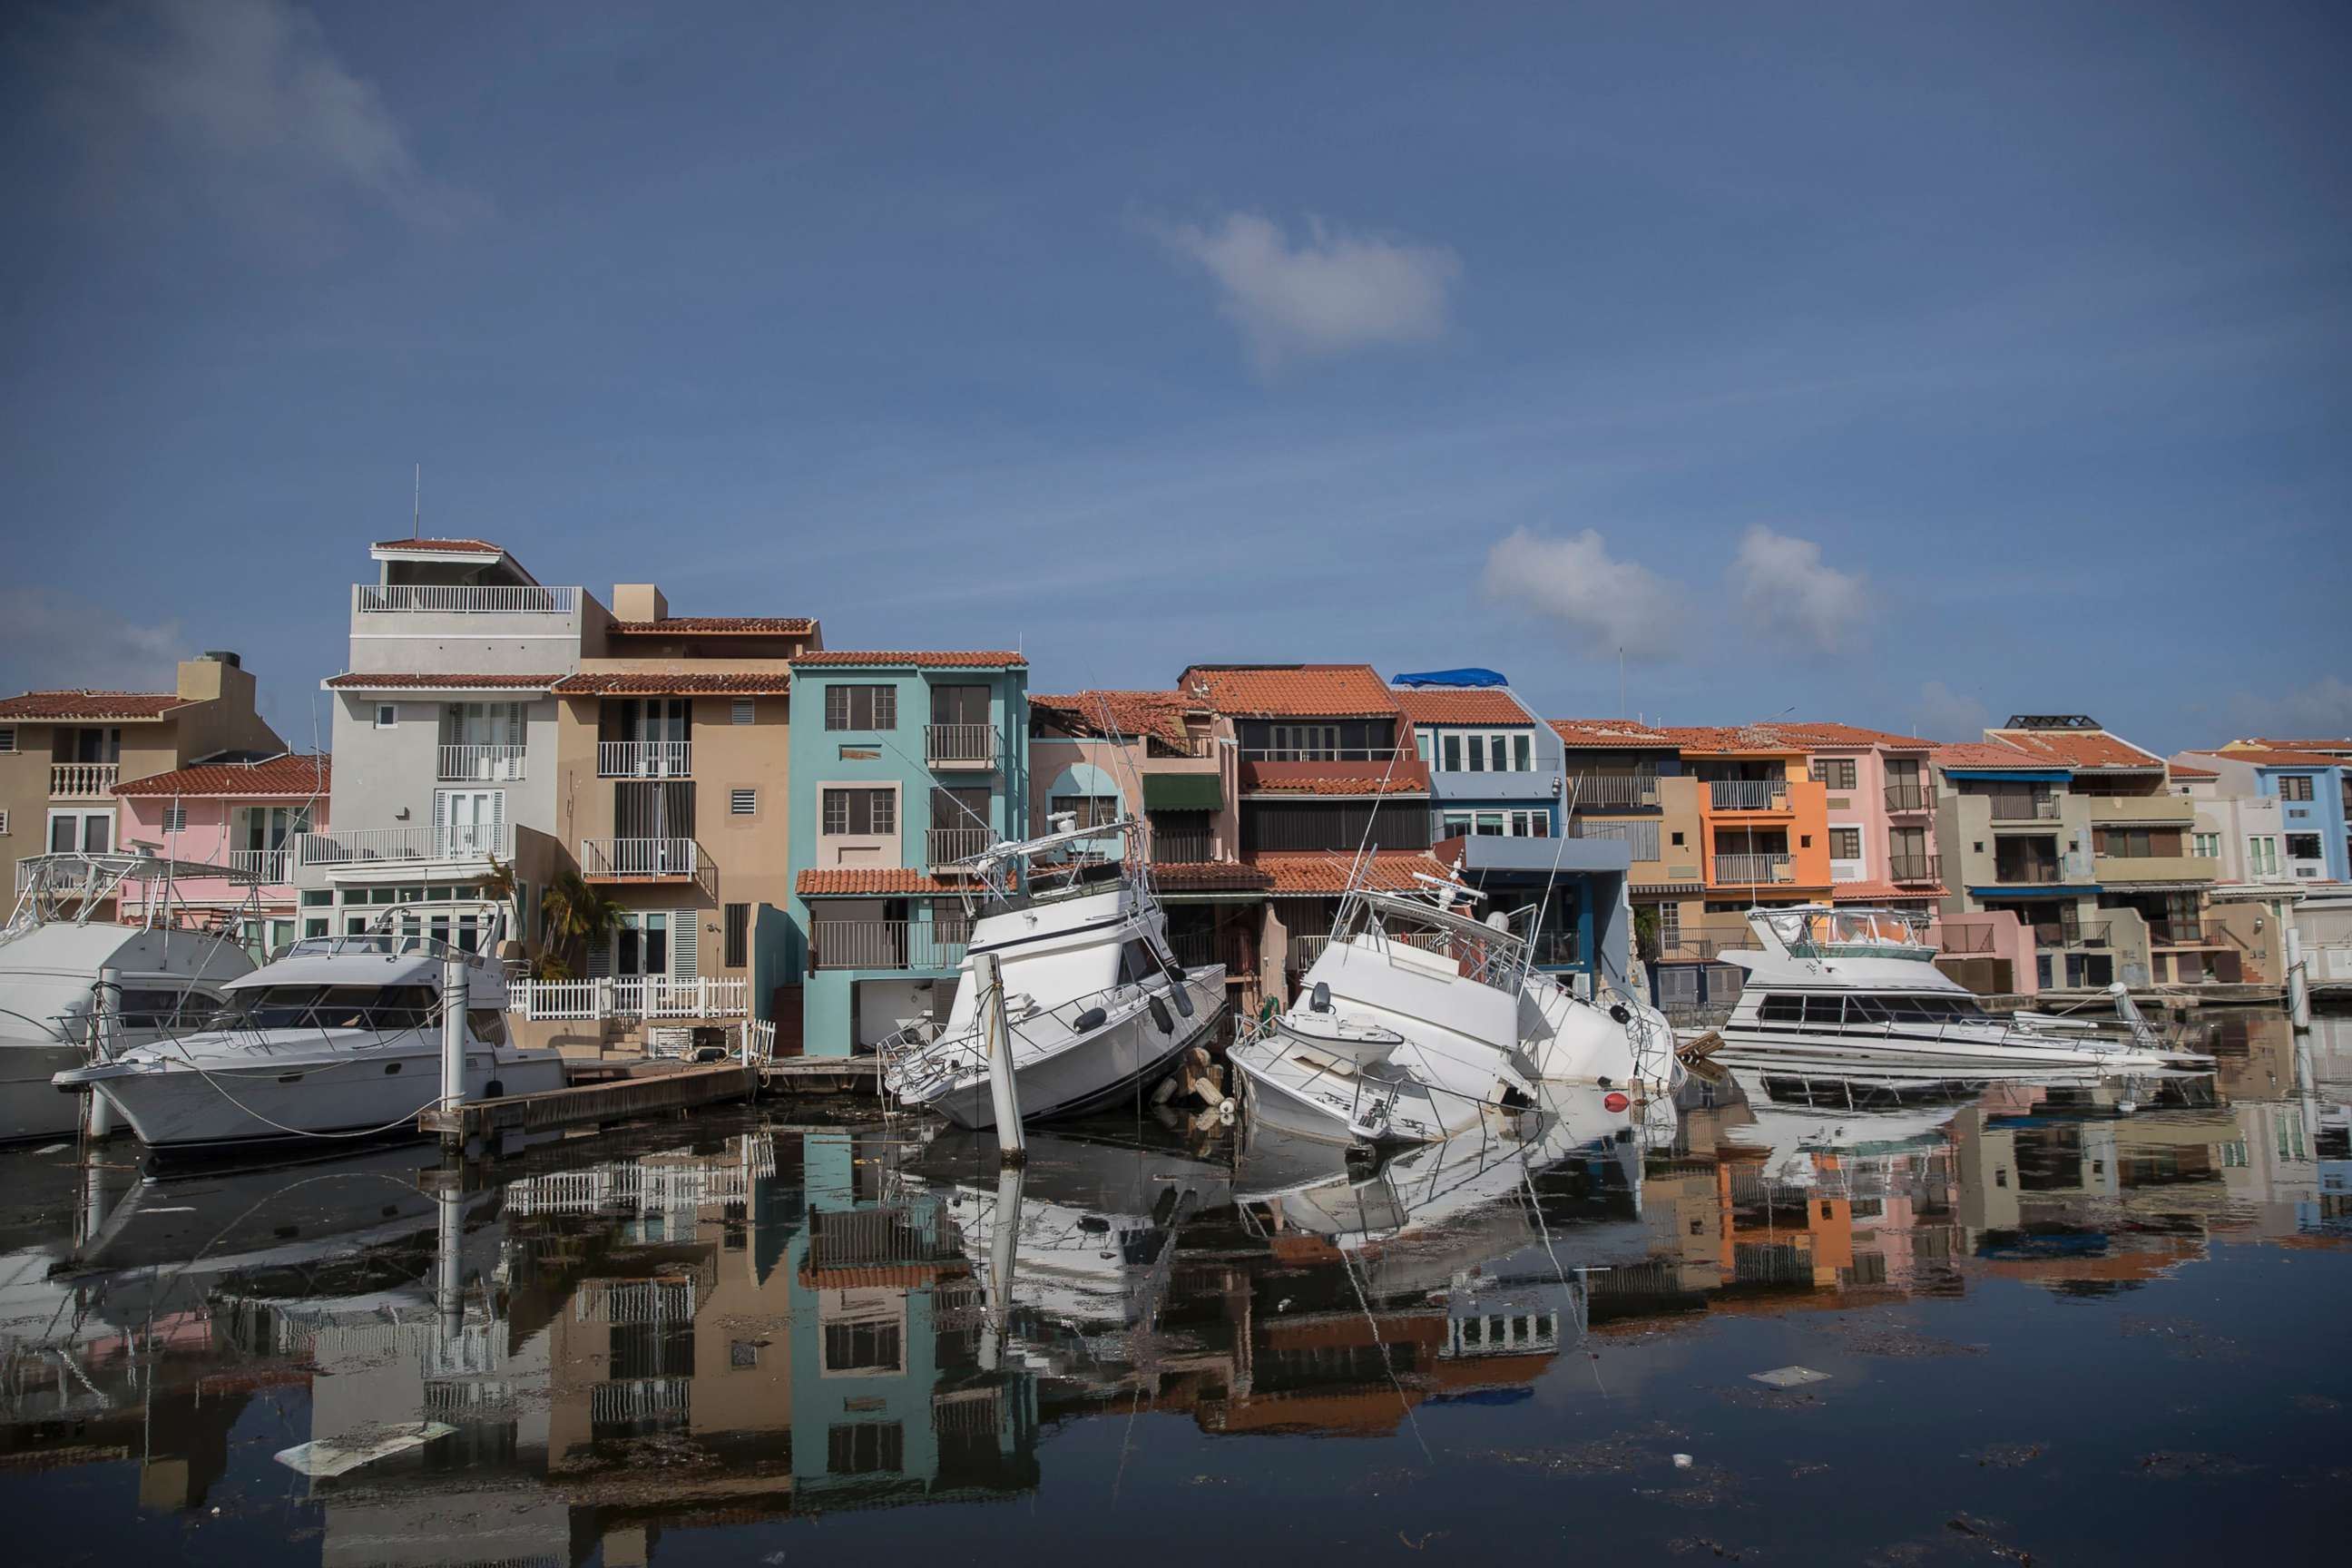 PHOTO: Yachts lie wrecked in a marina in the Palmas del Mar resort near Humacao, Puerto Rico, Sept. 24, 2017. Hurricane Maria lashed Puerto Rico as a strong Category 4 storm, causing widespread damage and leaving the island without power. 